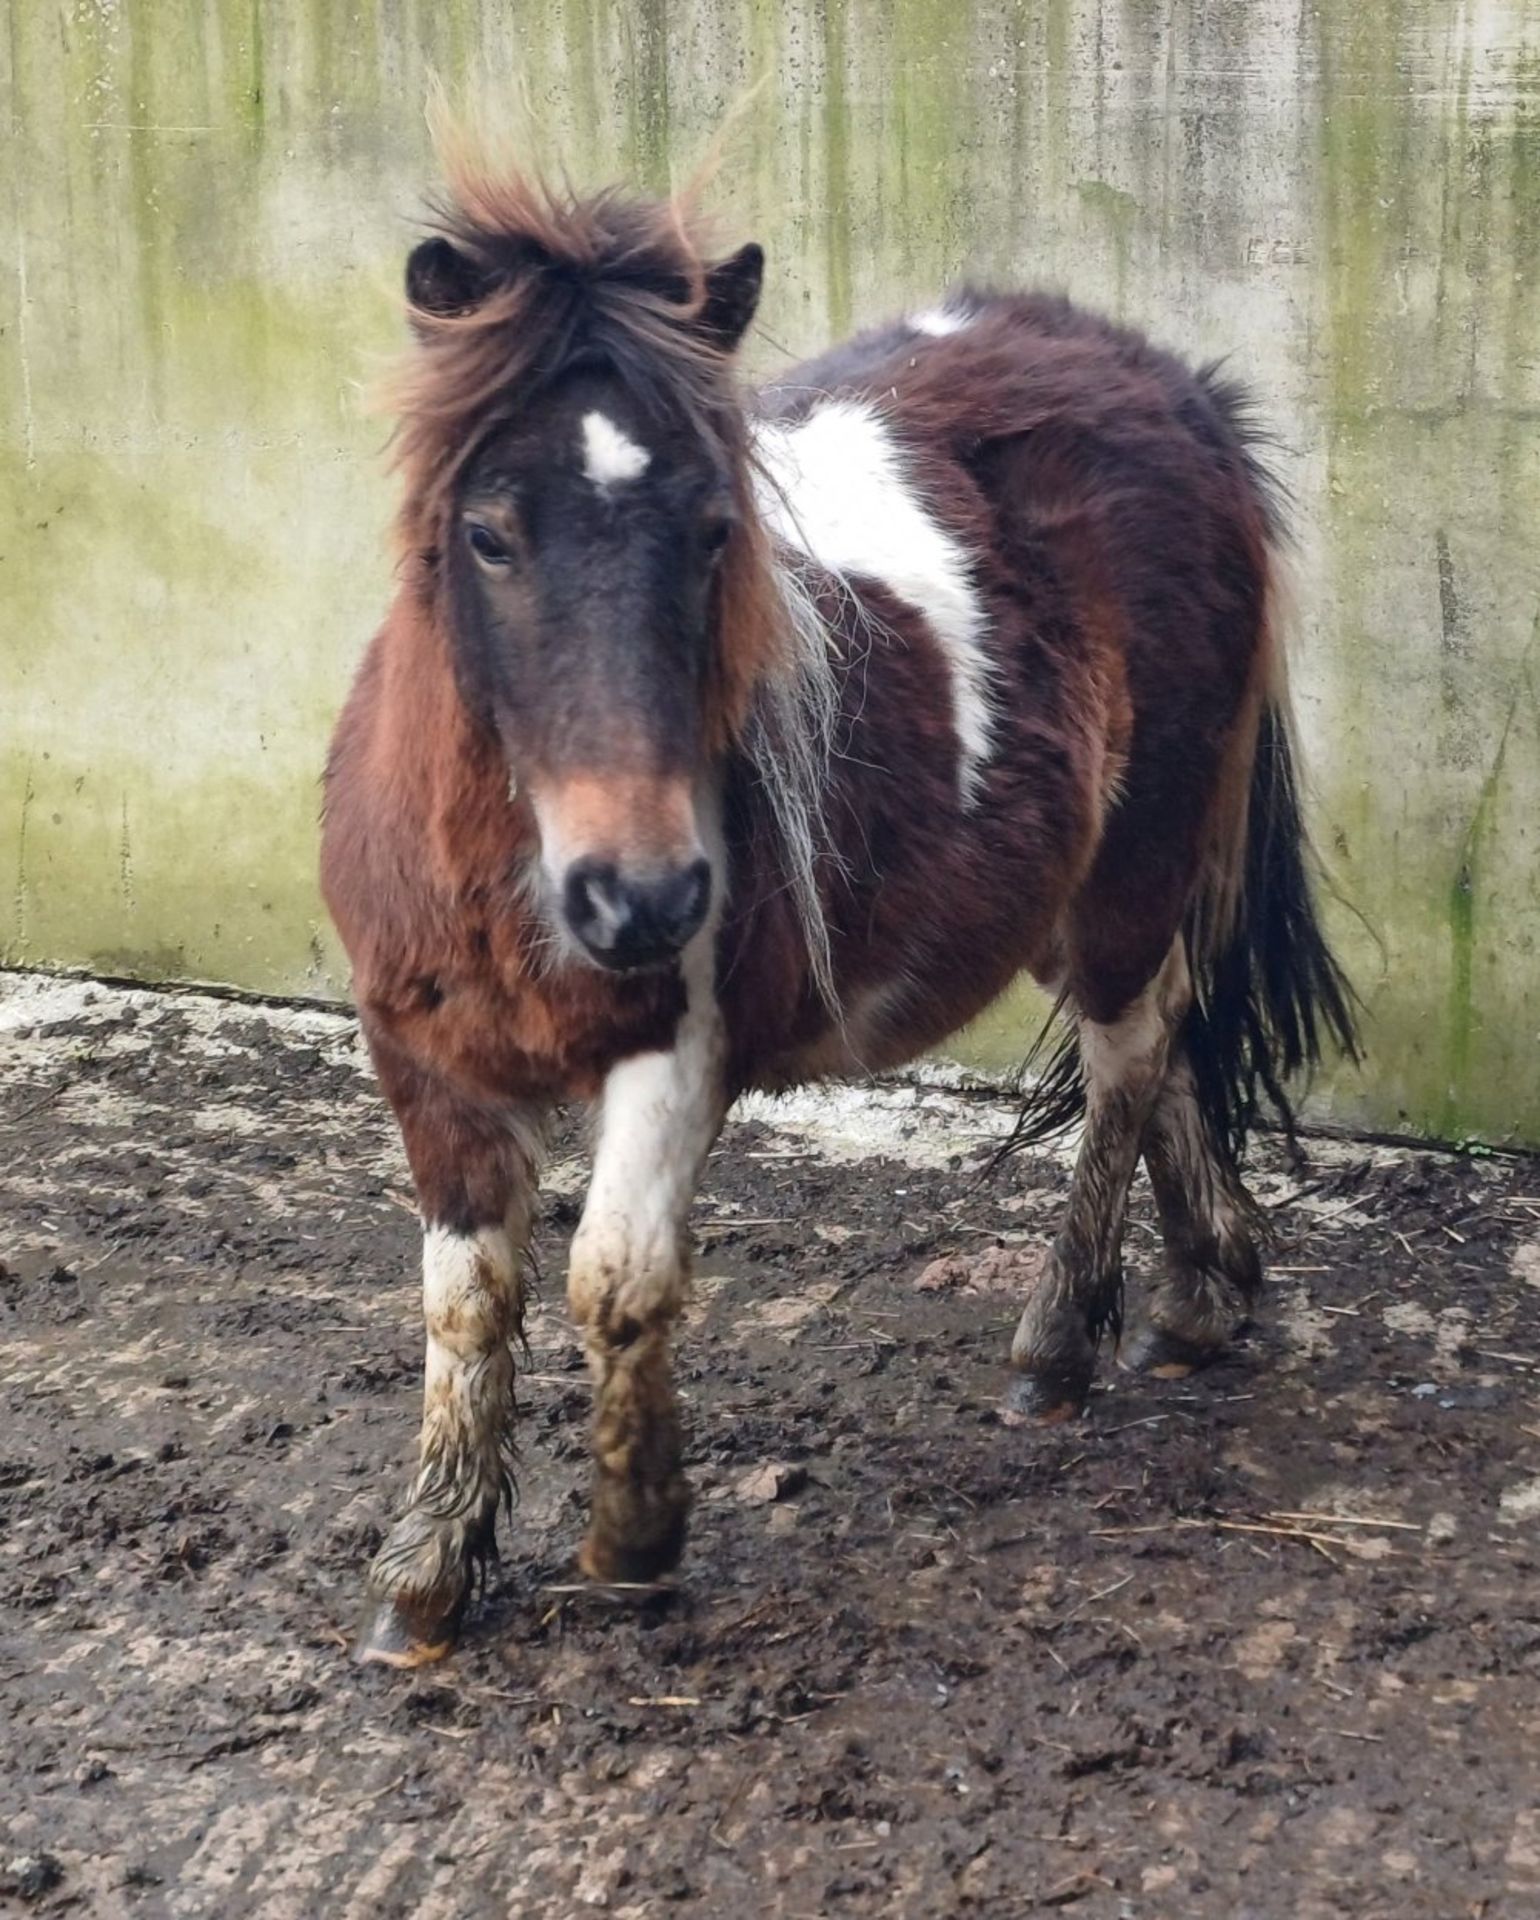 'GODSWORTHY SPICE' DARTMOOR HILL PONY SKEWBALD COLT APPROX 18 MONTHS OLD - Image 10 of 12